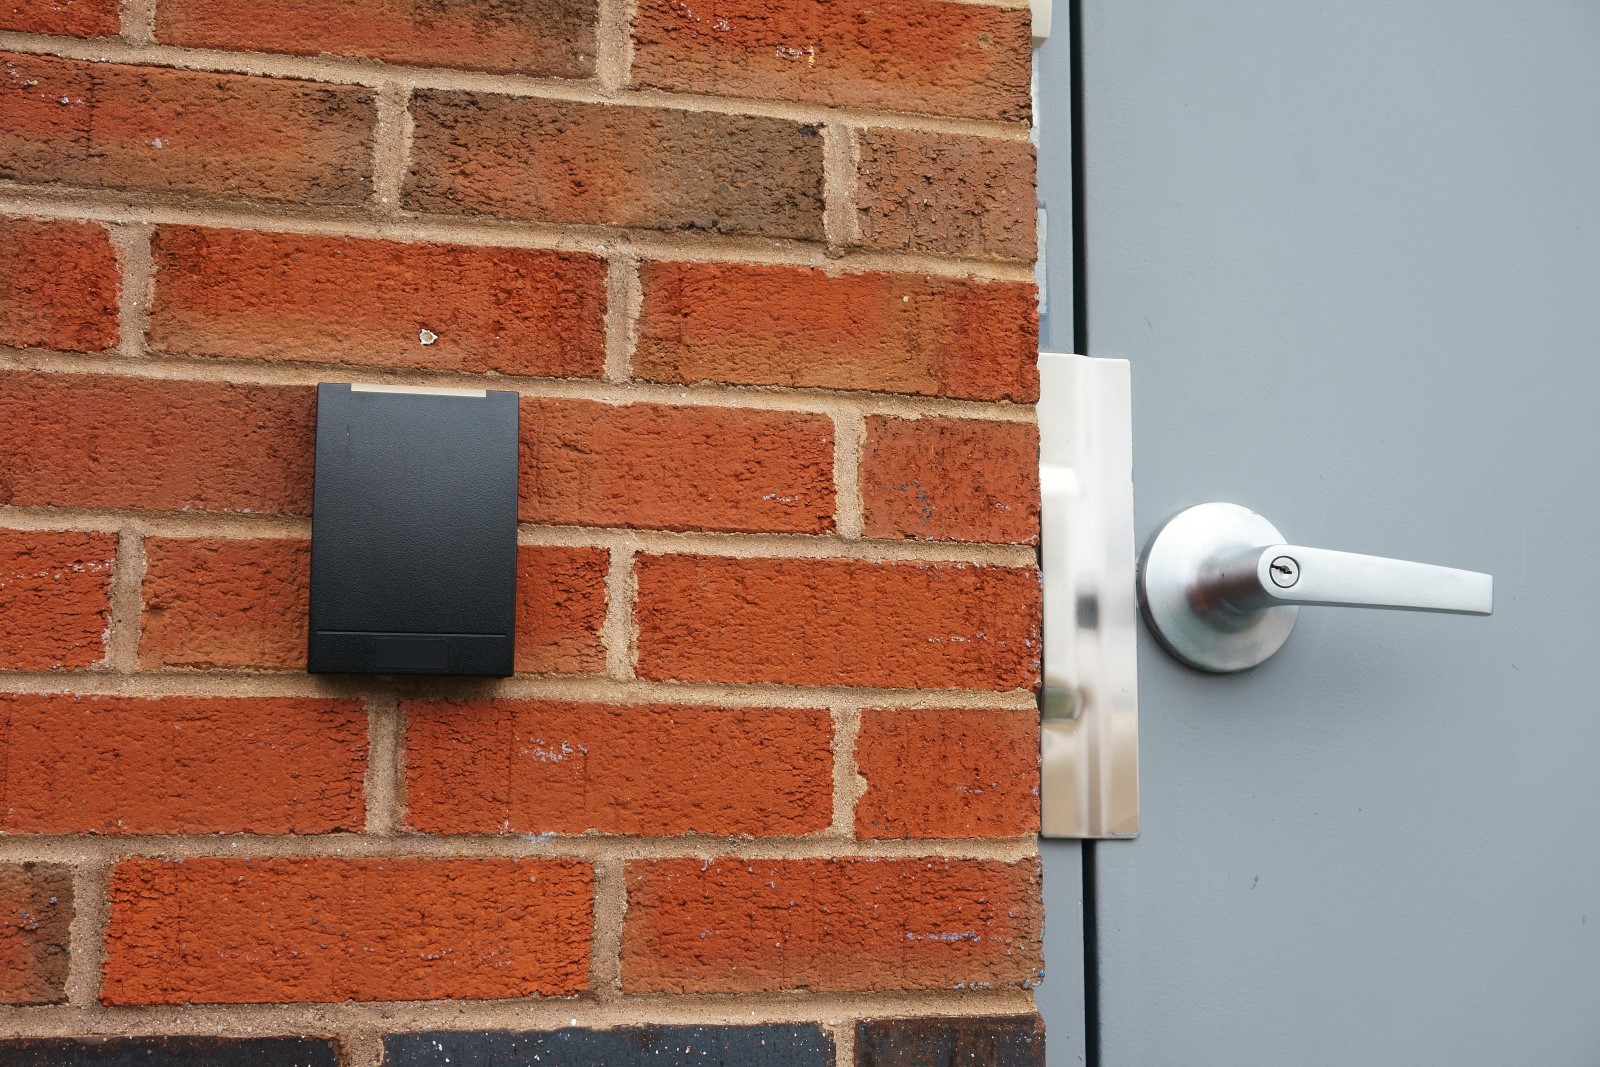 A door entrance card reader for a small business.